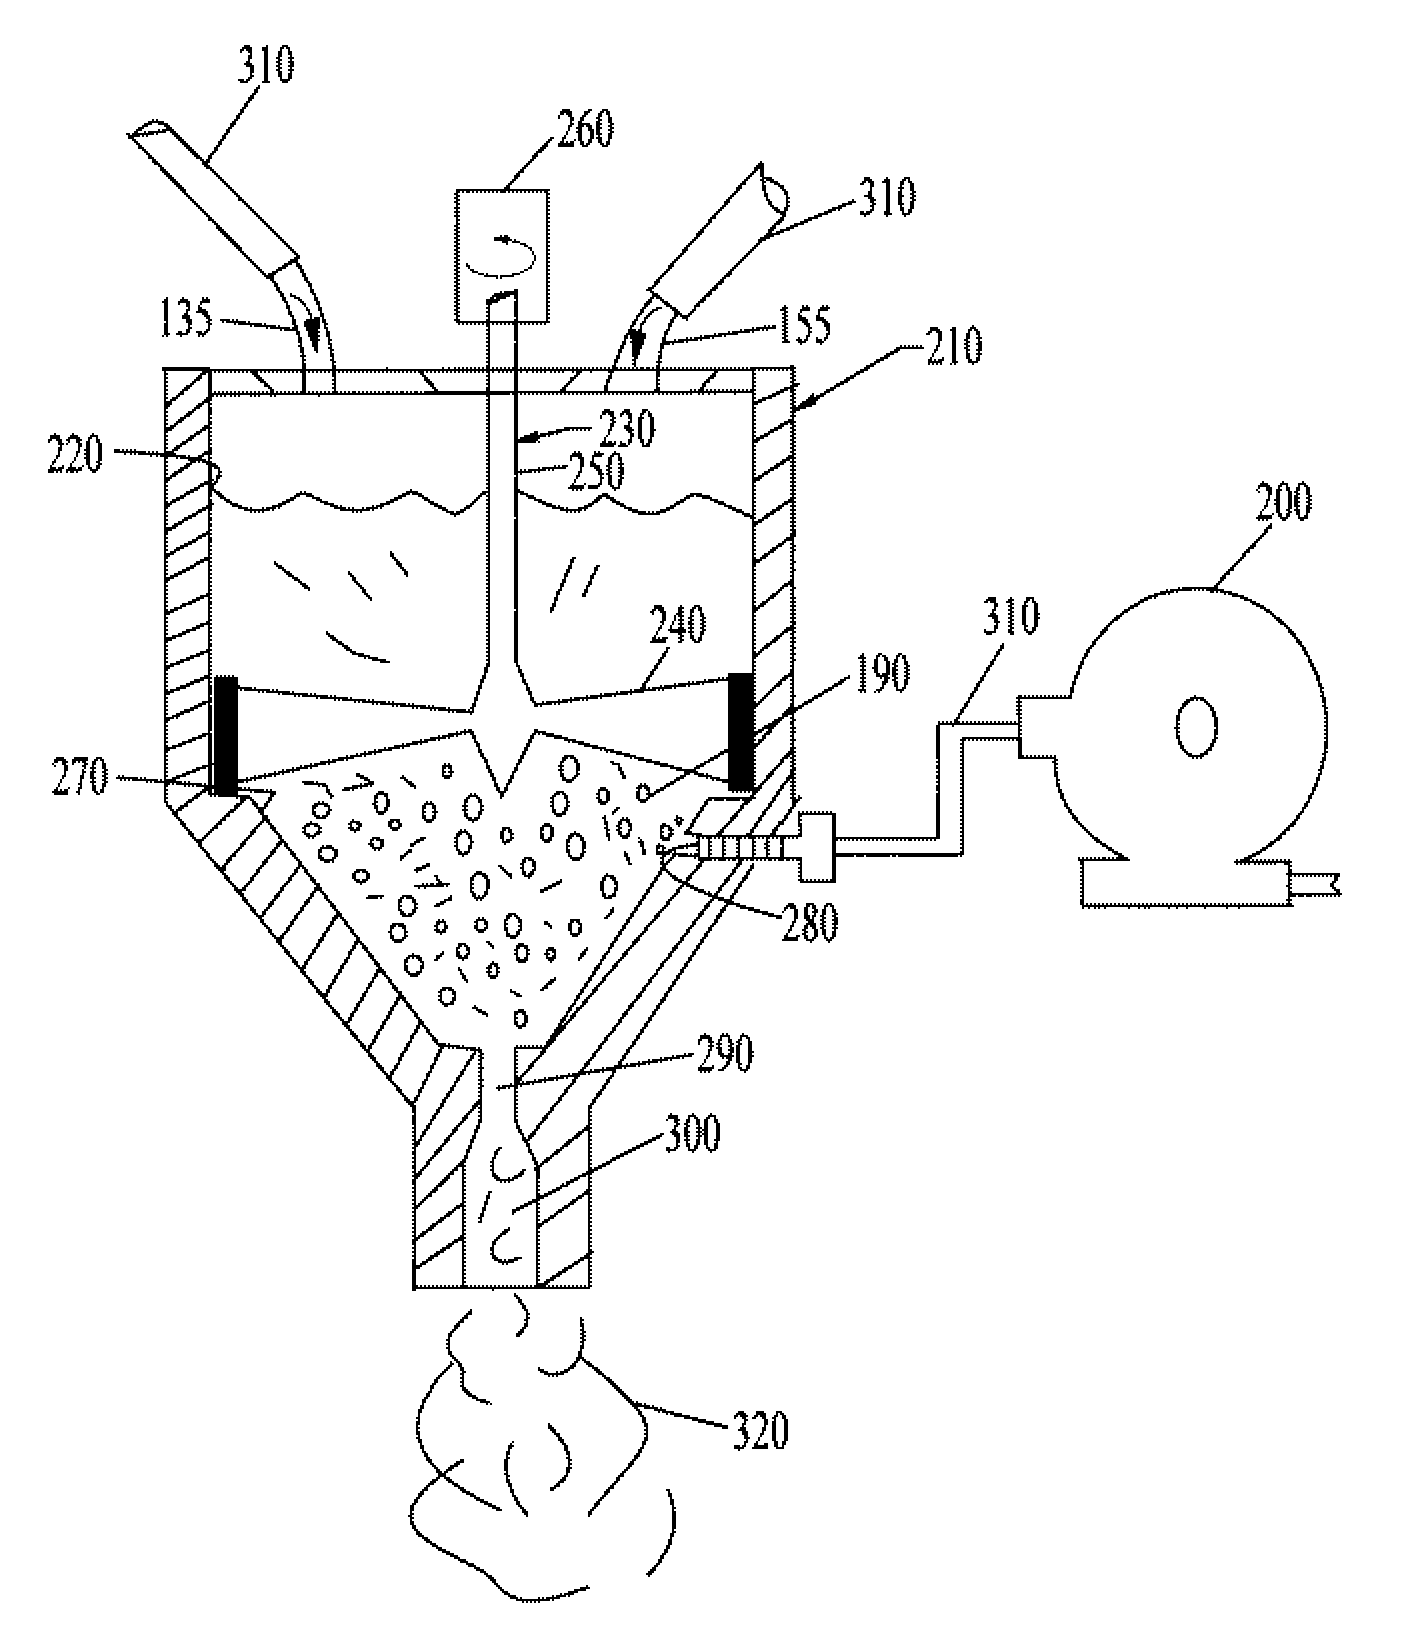 System and Method for Producing Foamed Milk from Powder